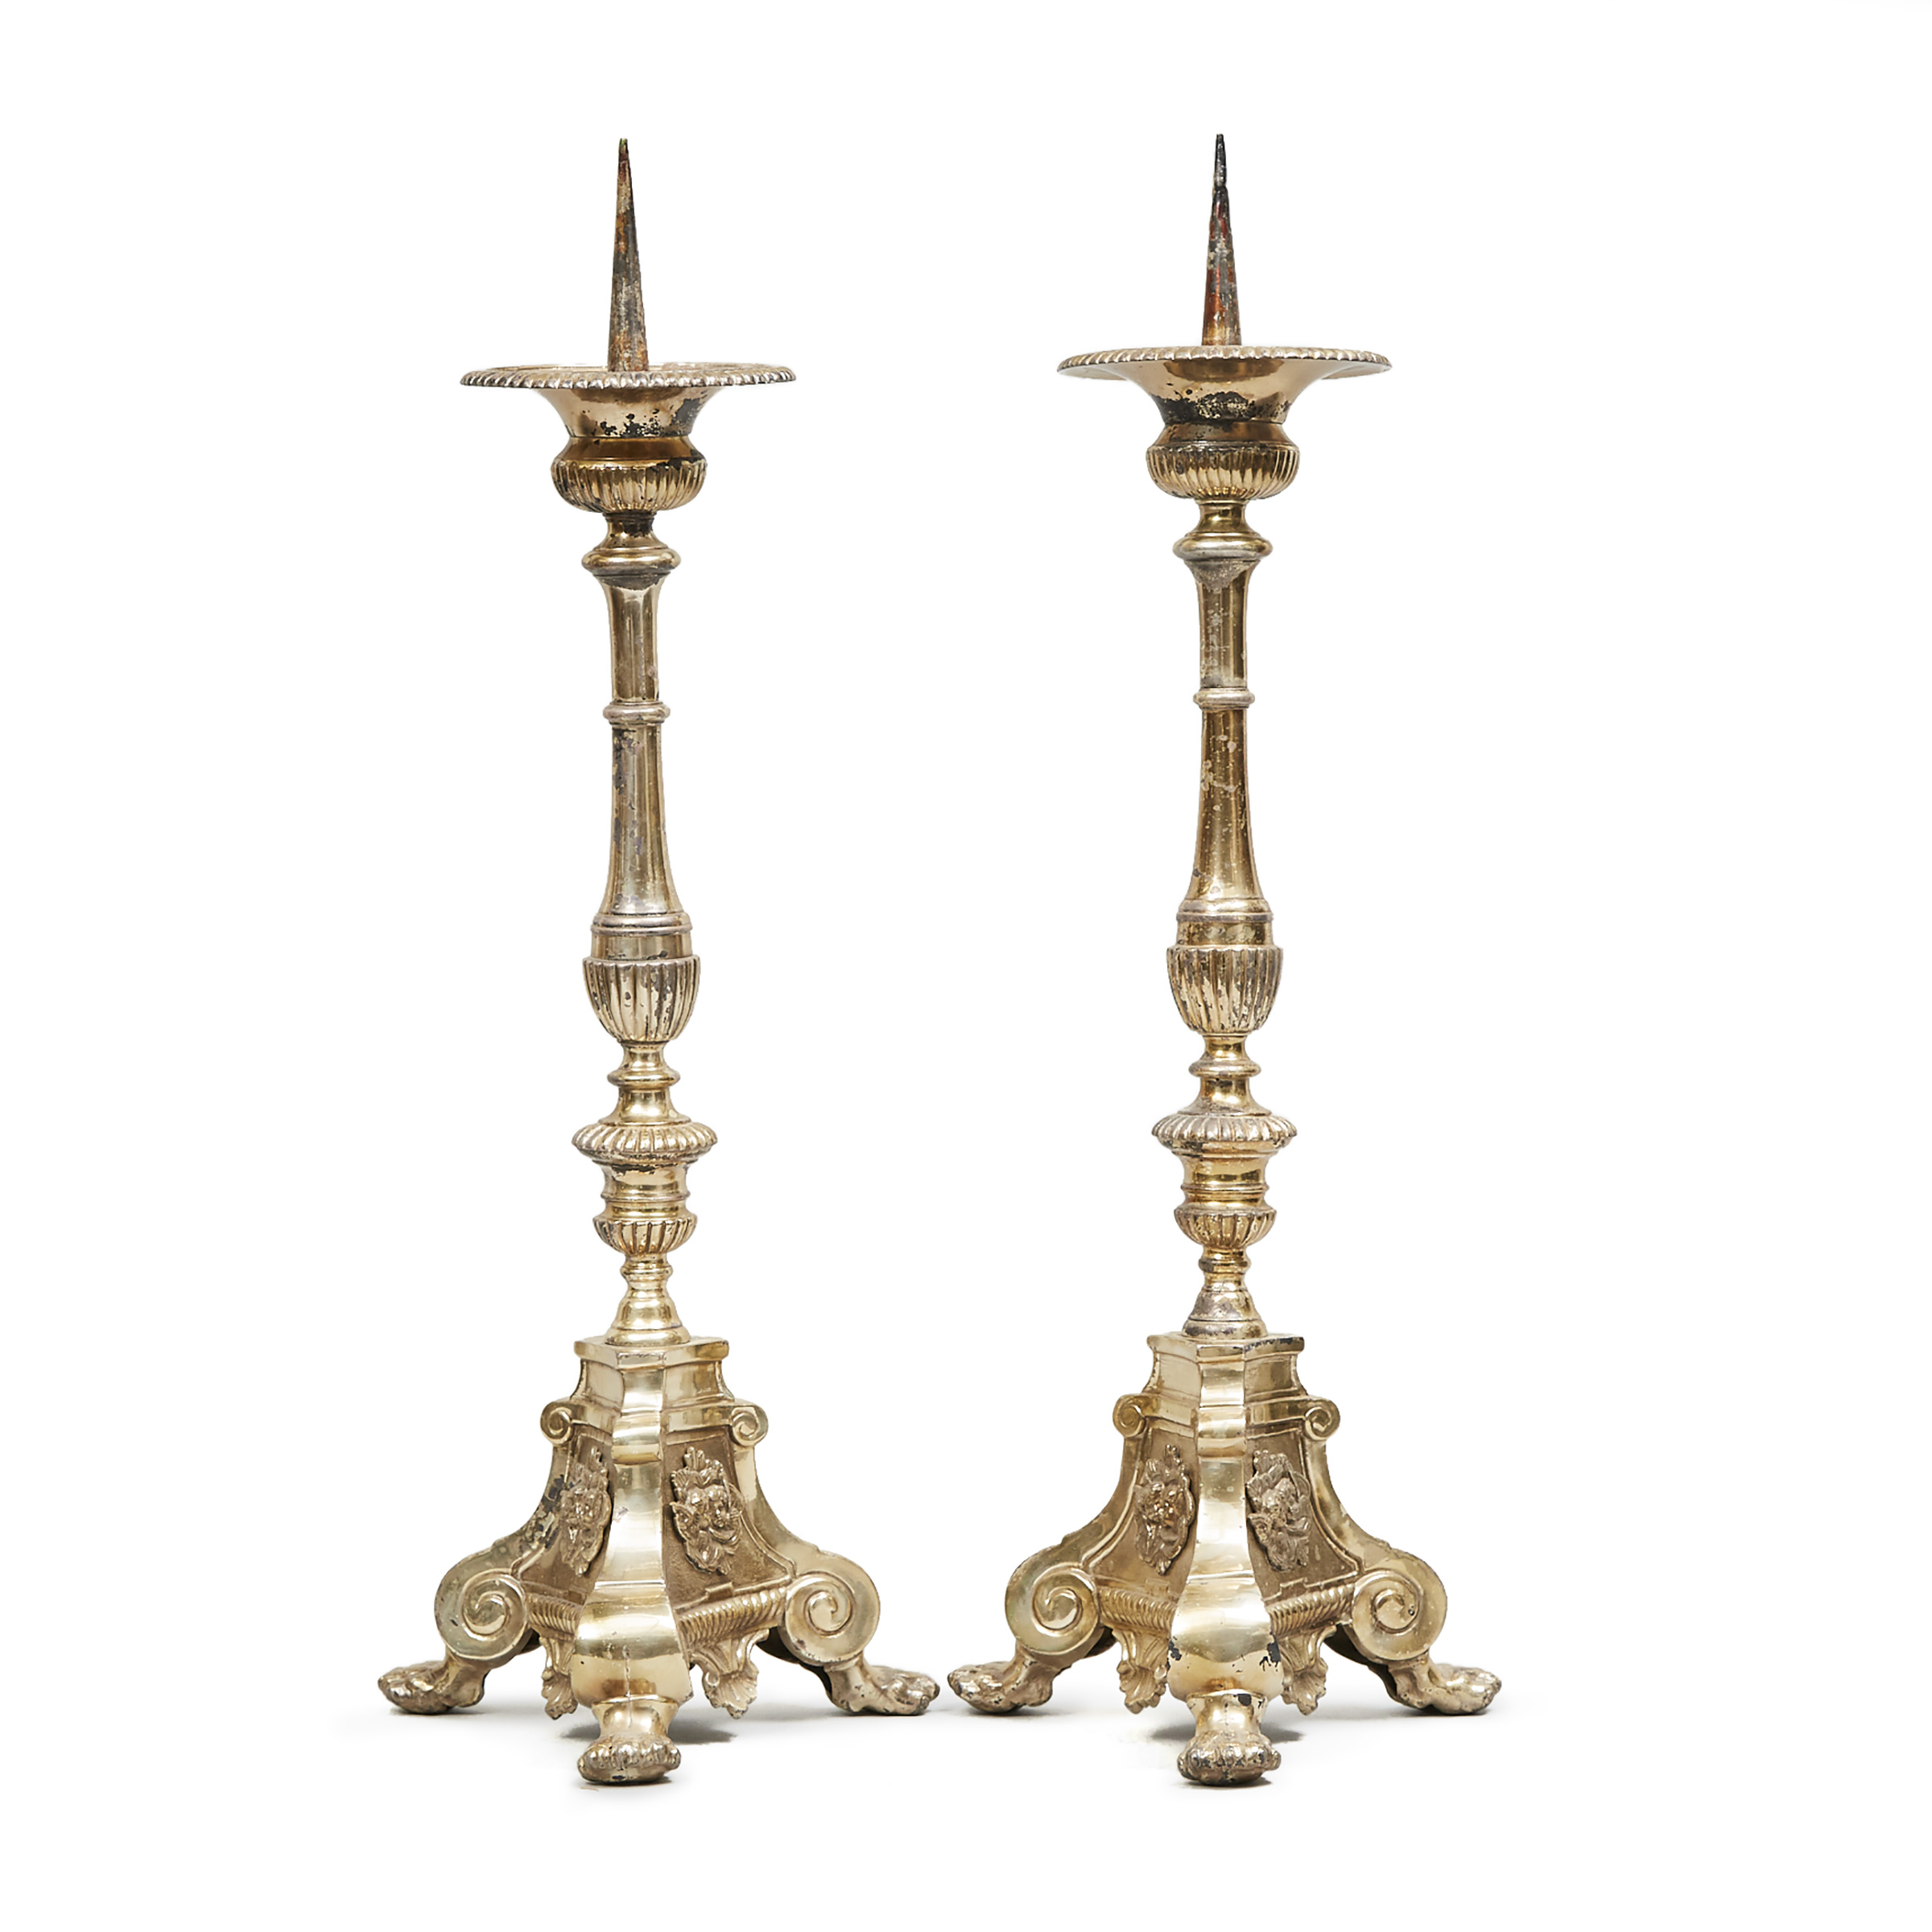 Pair of French Silvered Bronze Altar Pricket Candlesticks, c.1840